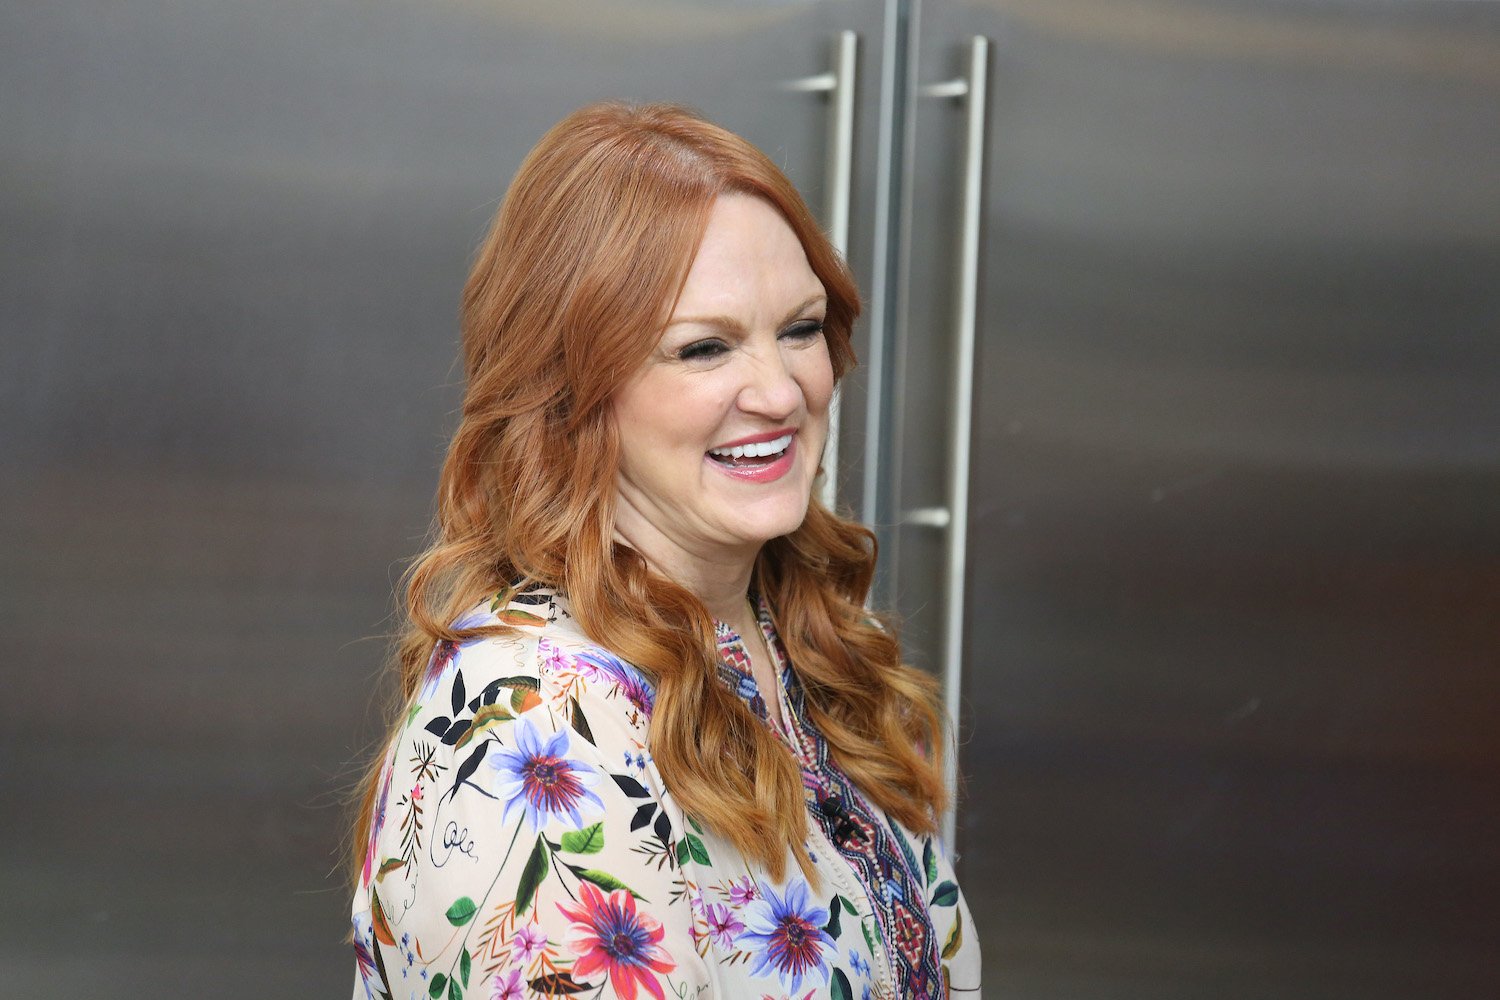 Ree Drummond Shows Fans ‘It’s Not All That Quiet’ on the Ranch as ‘The Pioneer Woman’ Star Drives Through a Herd of Cattle